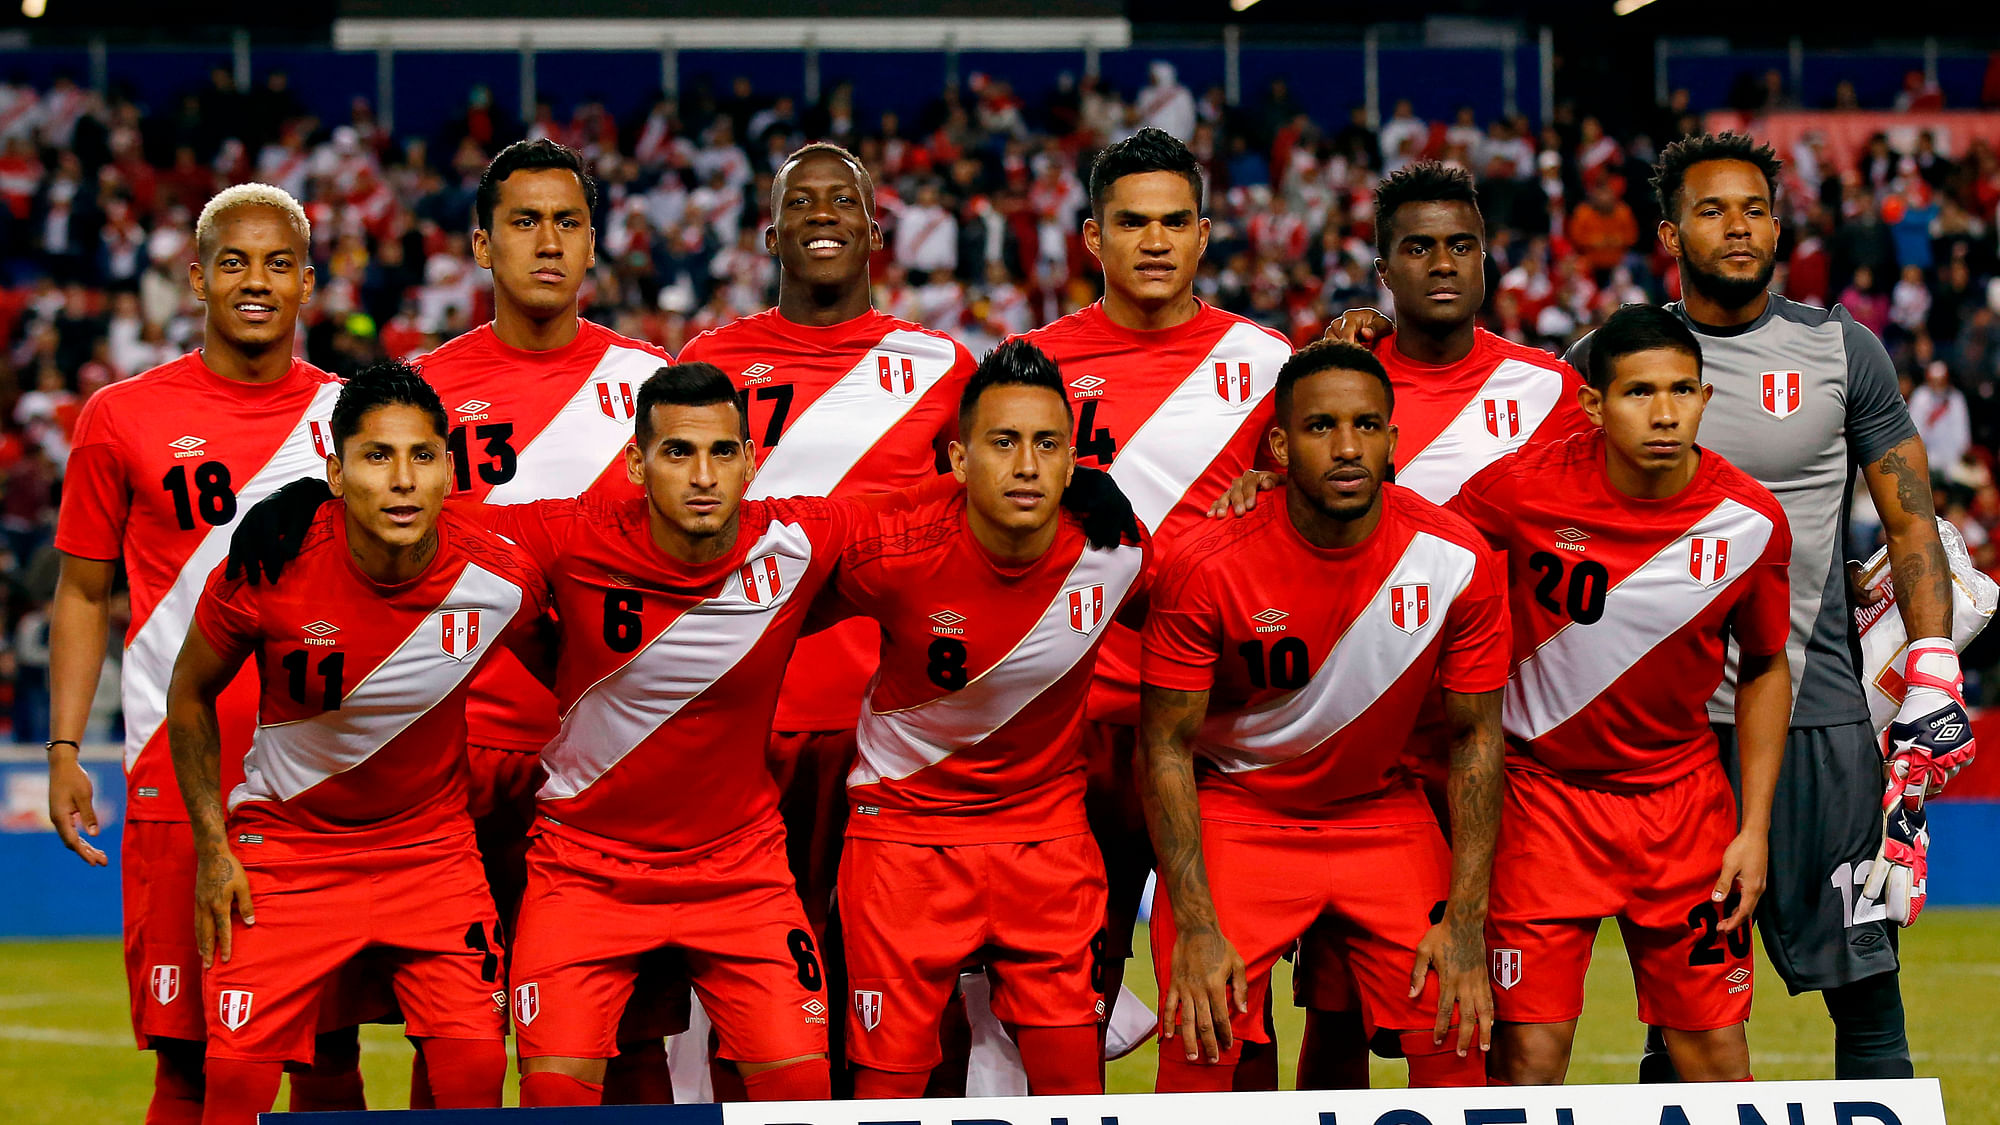 FIFA World Cup Preview: Peru Returns to Finals After 36 Years